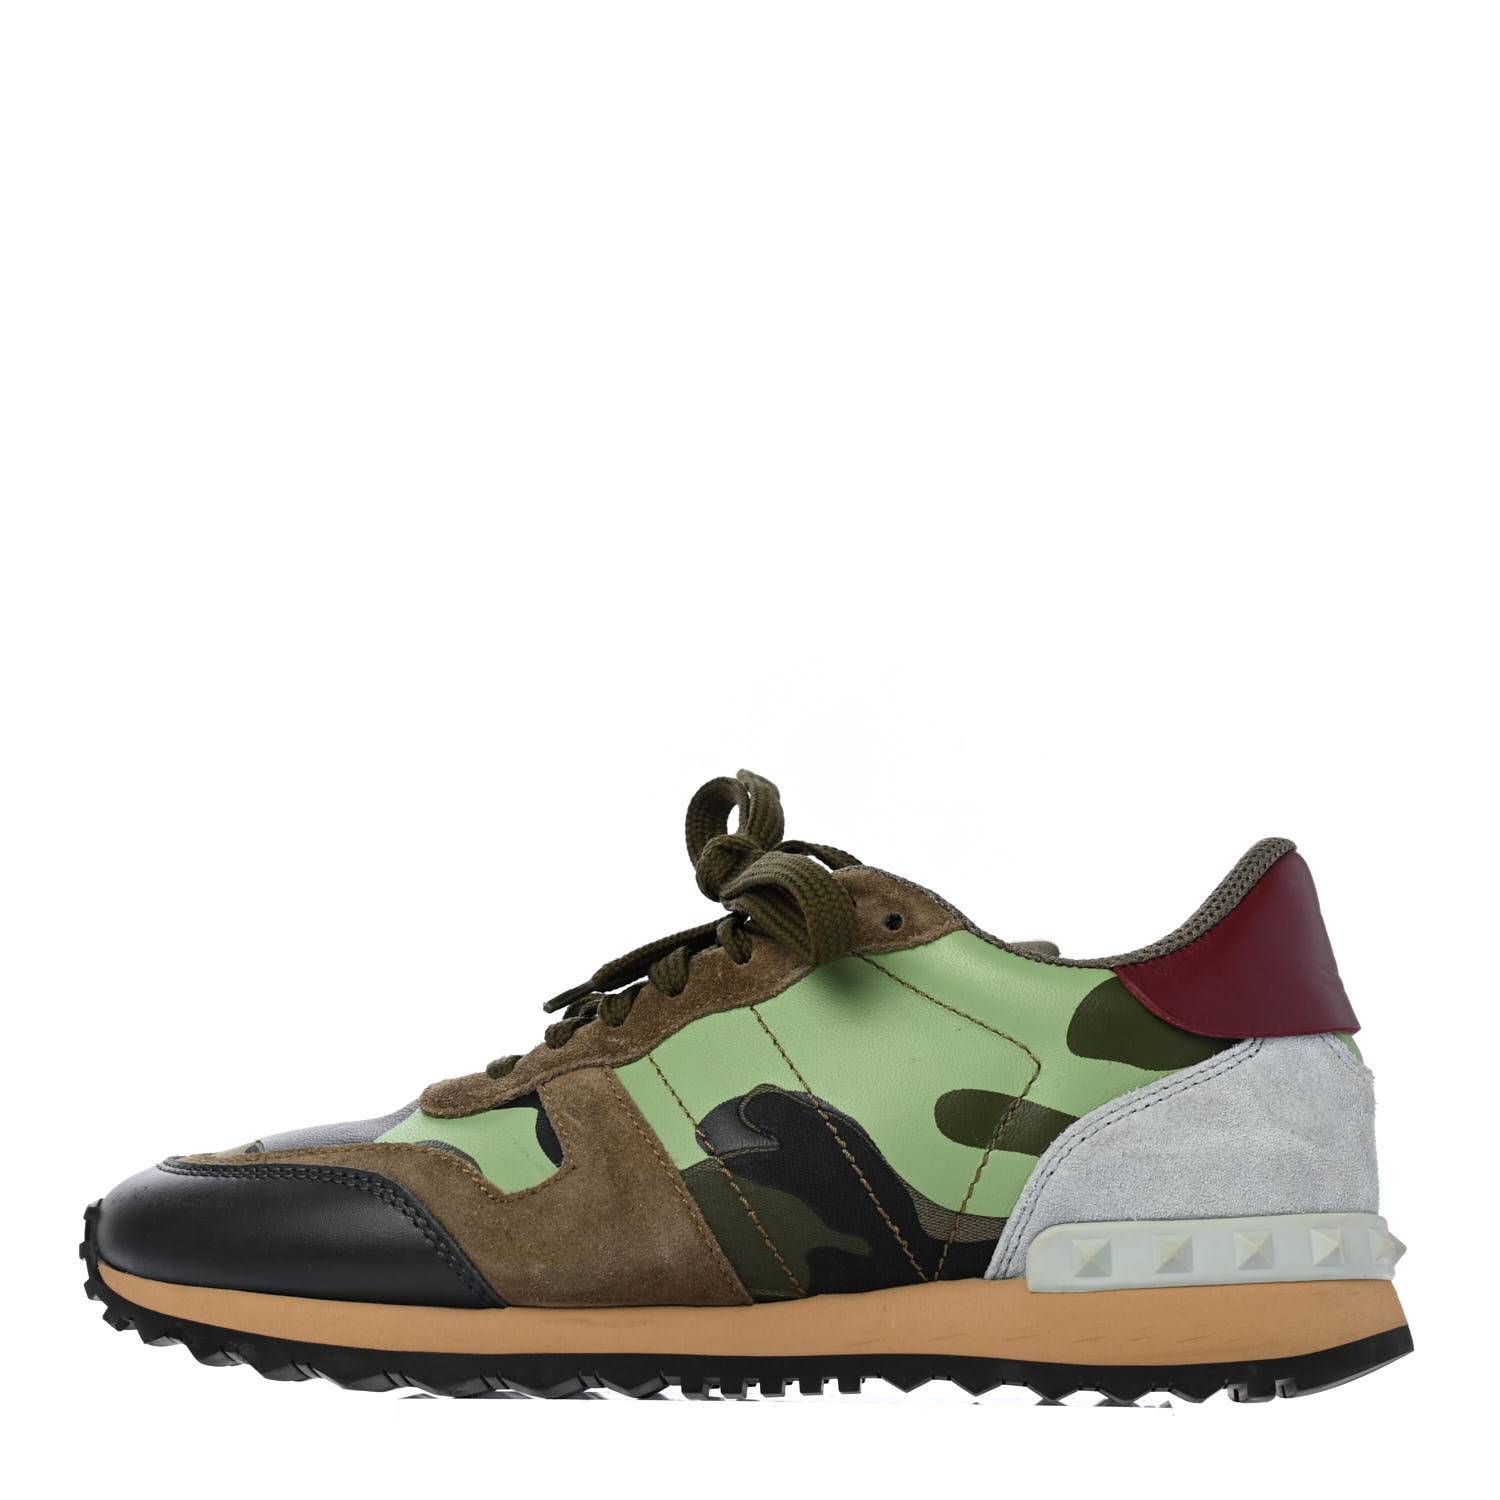 VALENTINO Nappa Suede Camouflage Womens Rockrunner Sneakers 38 